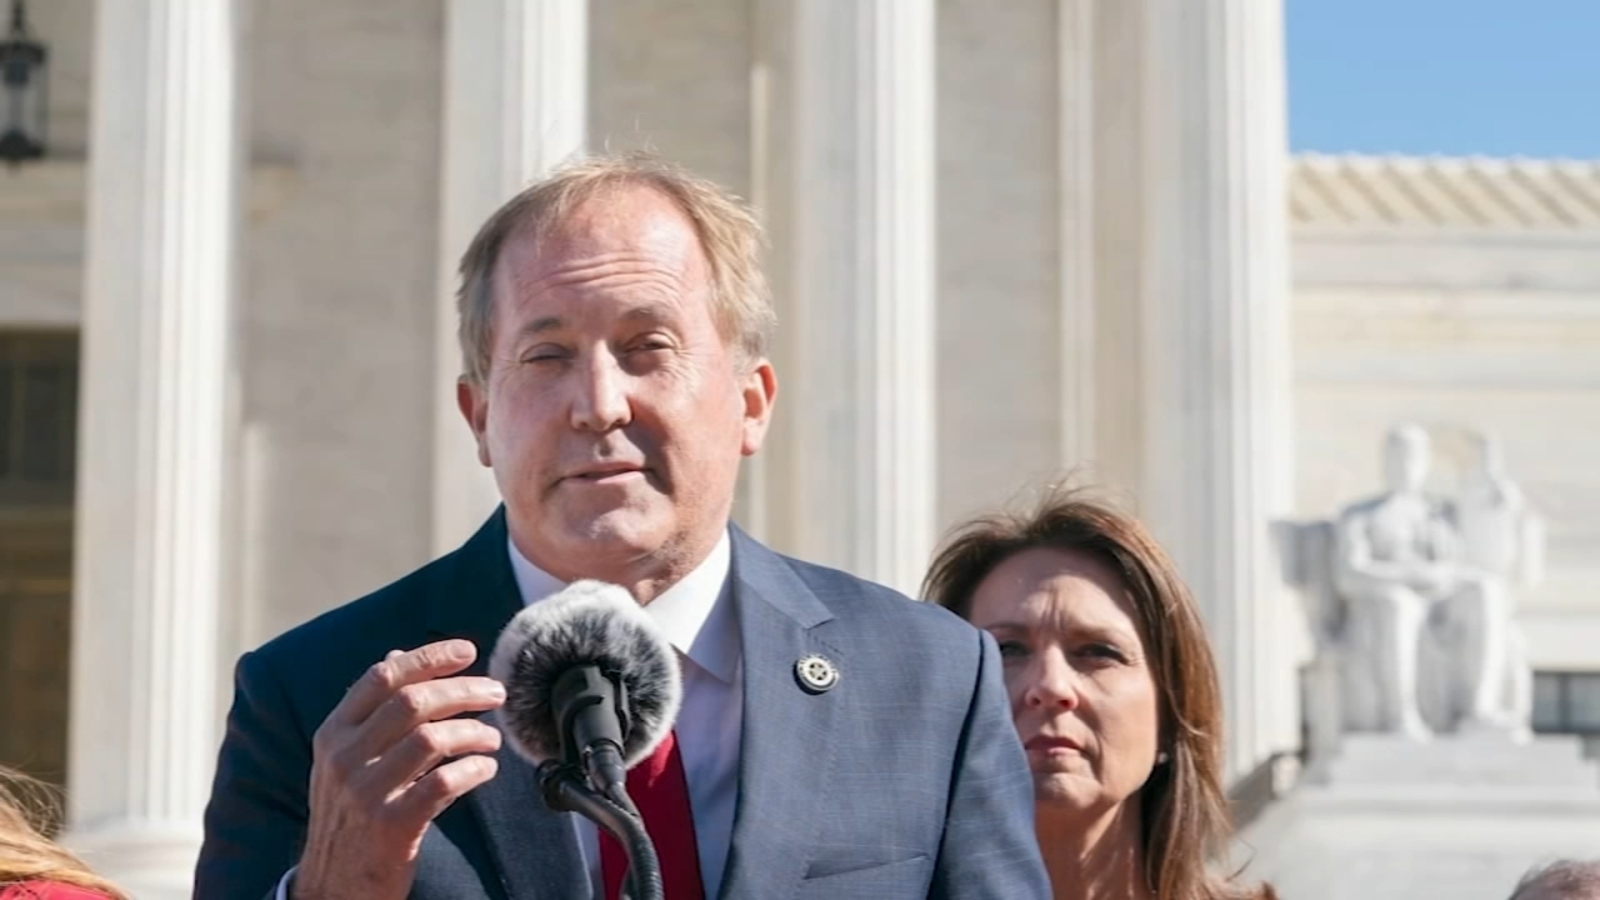 Ken Paxton securities fraud case: Texas AG reaches deal to avoid charges, agrees to six-figure restitution and community service [Video]